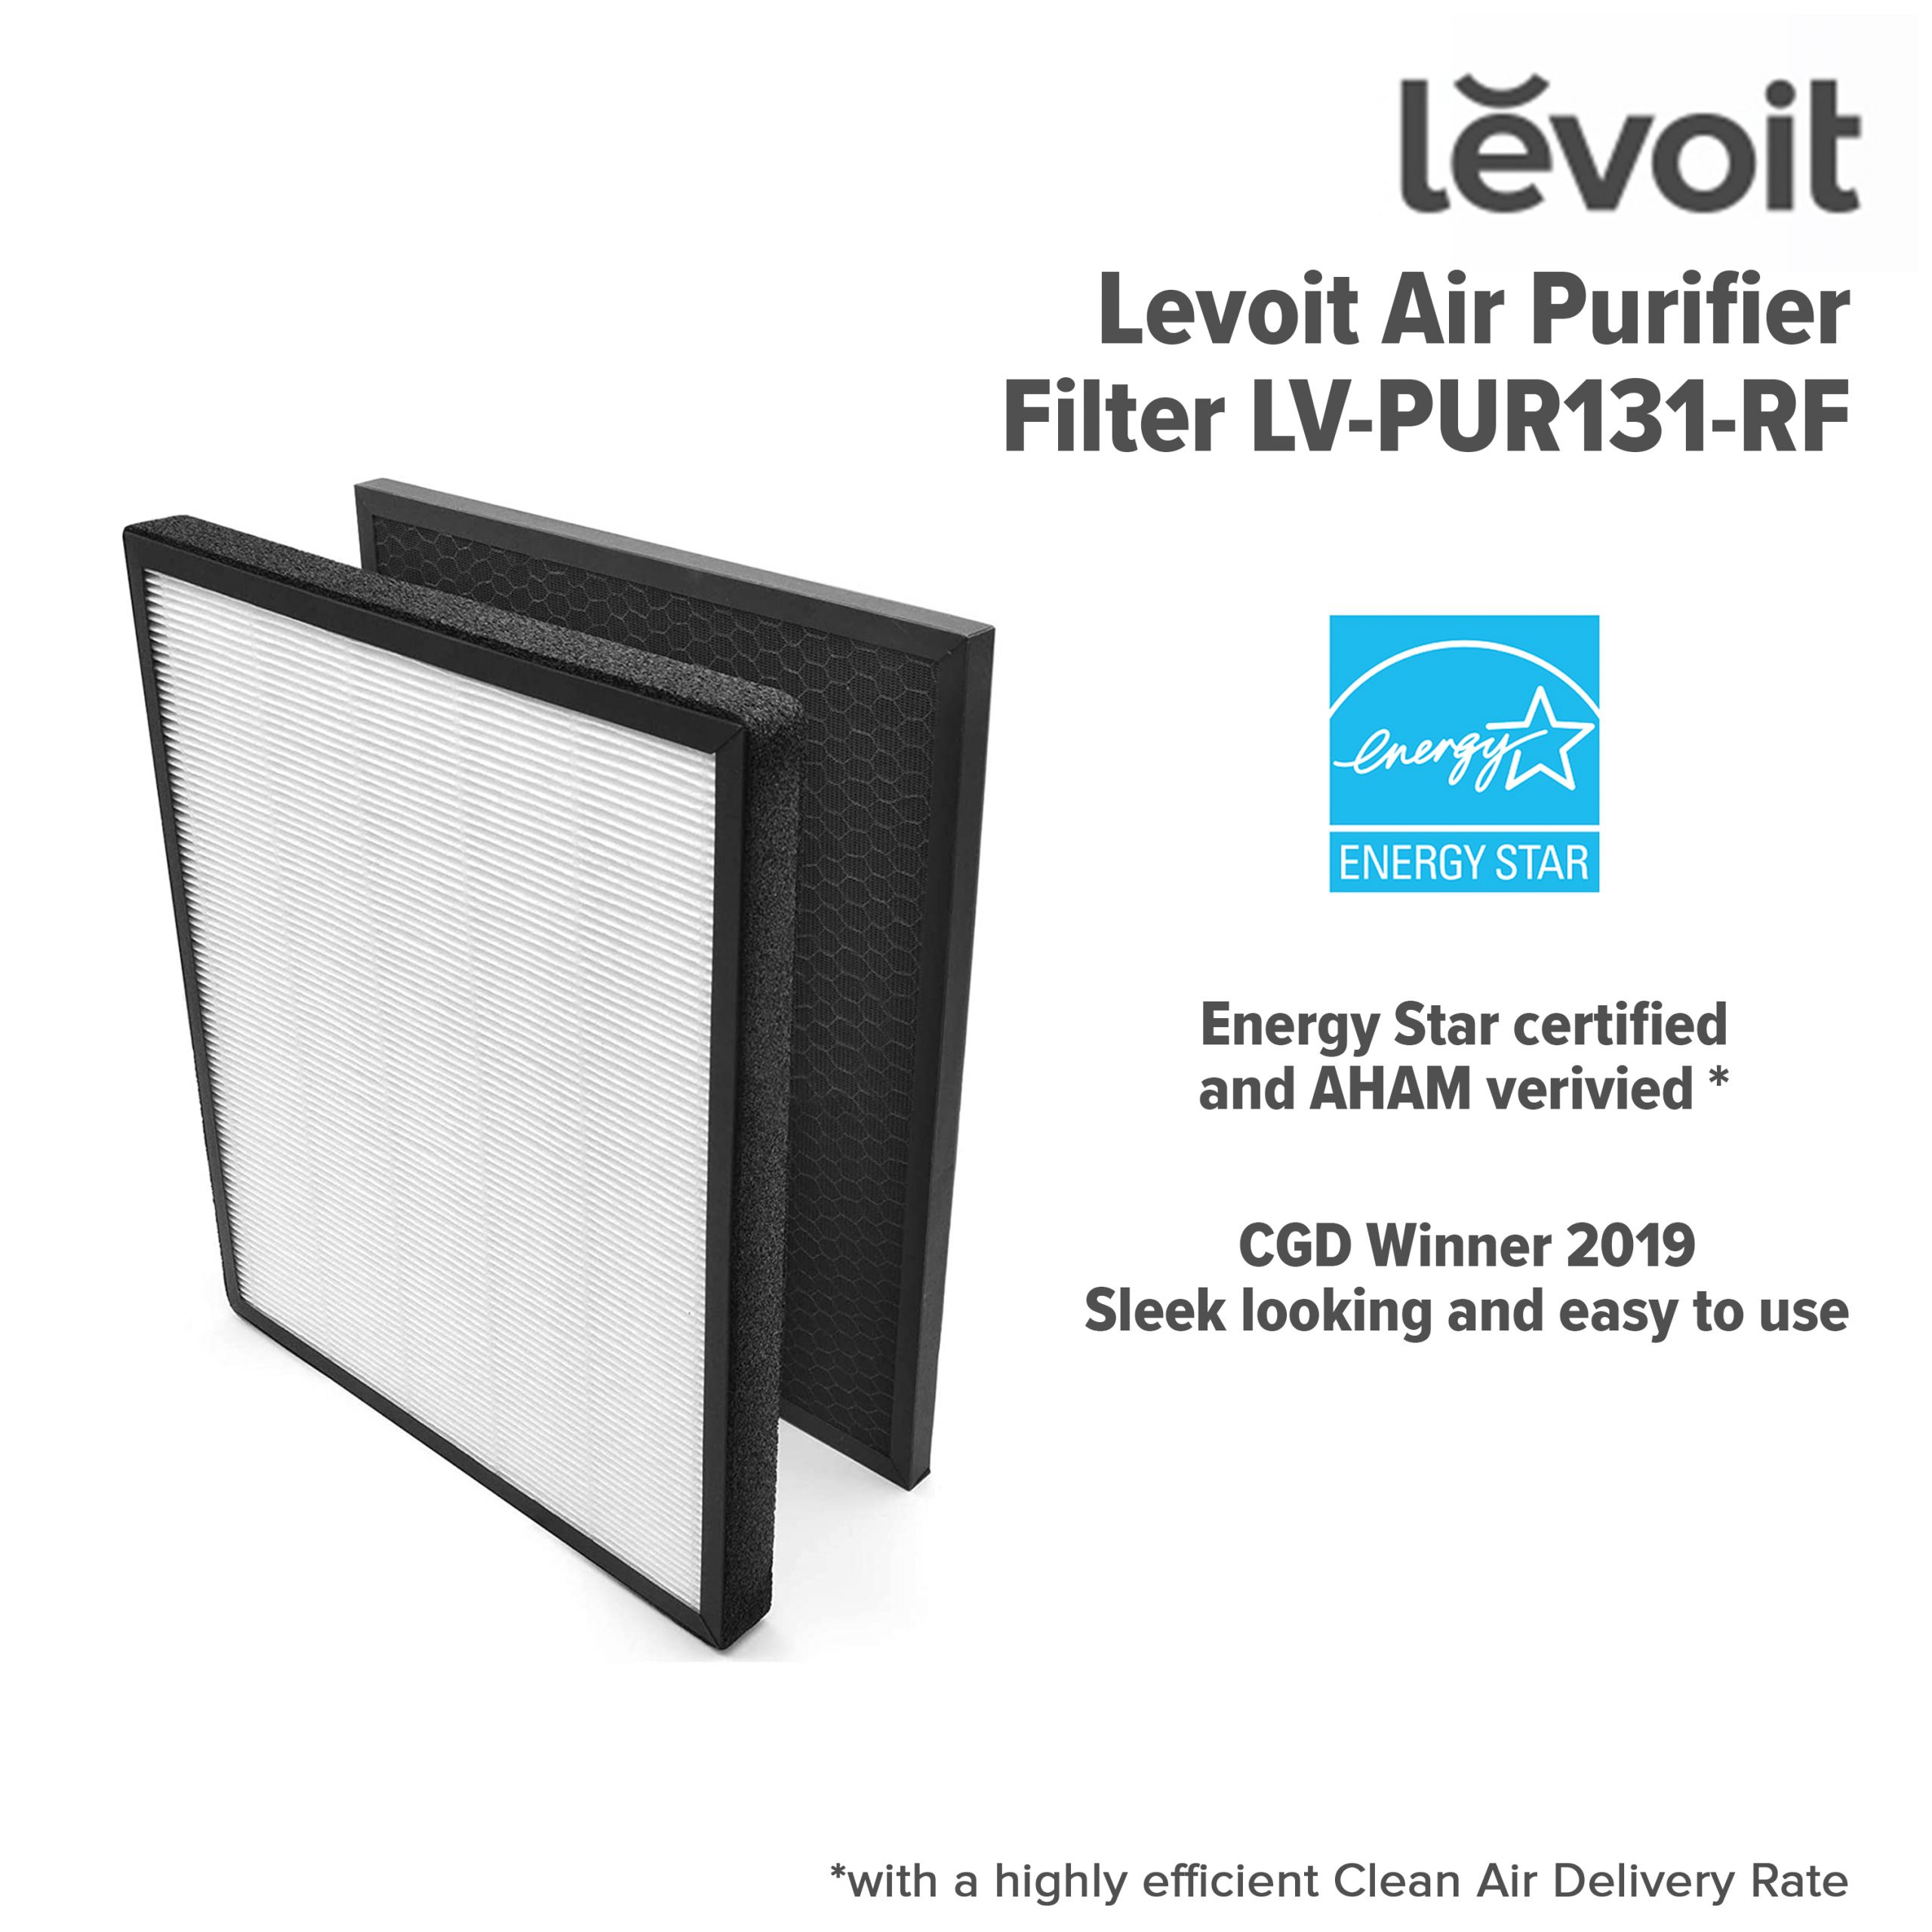 LV-Pur131 Replacement Filter Compatible with Levoit LV-PUR131, LV